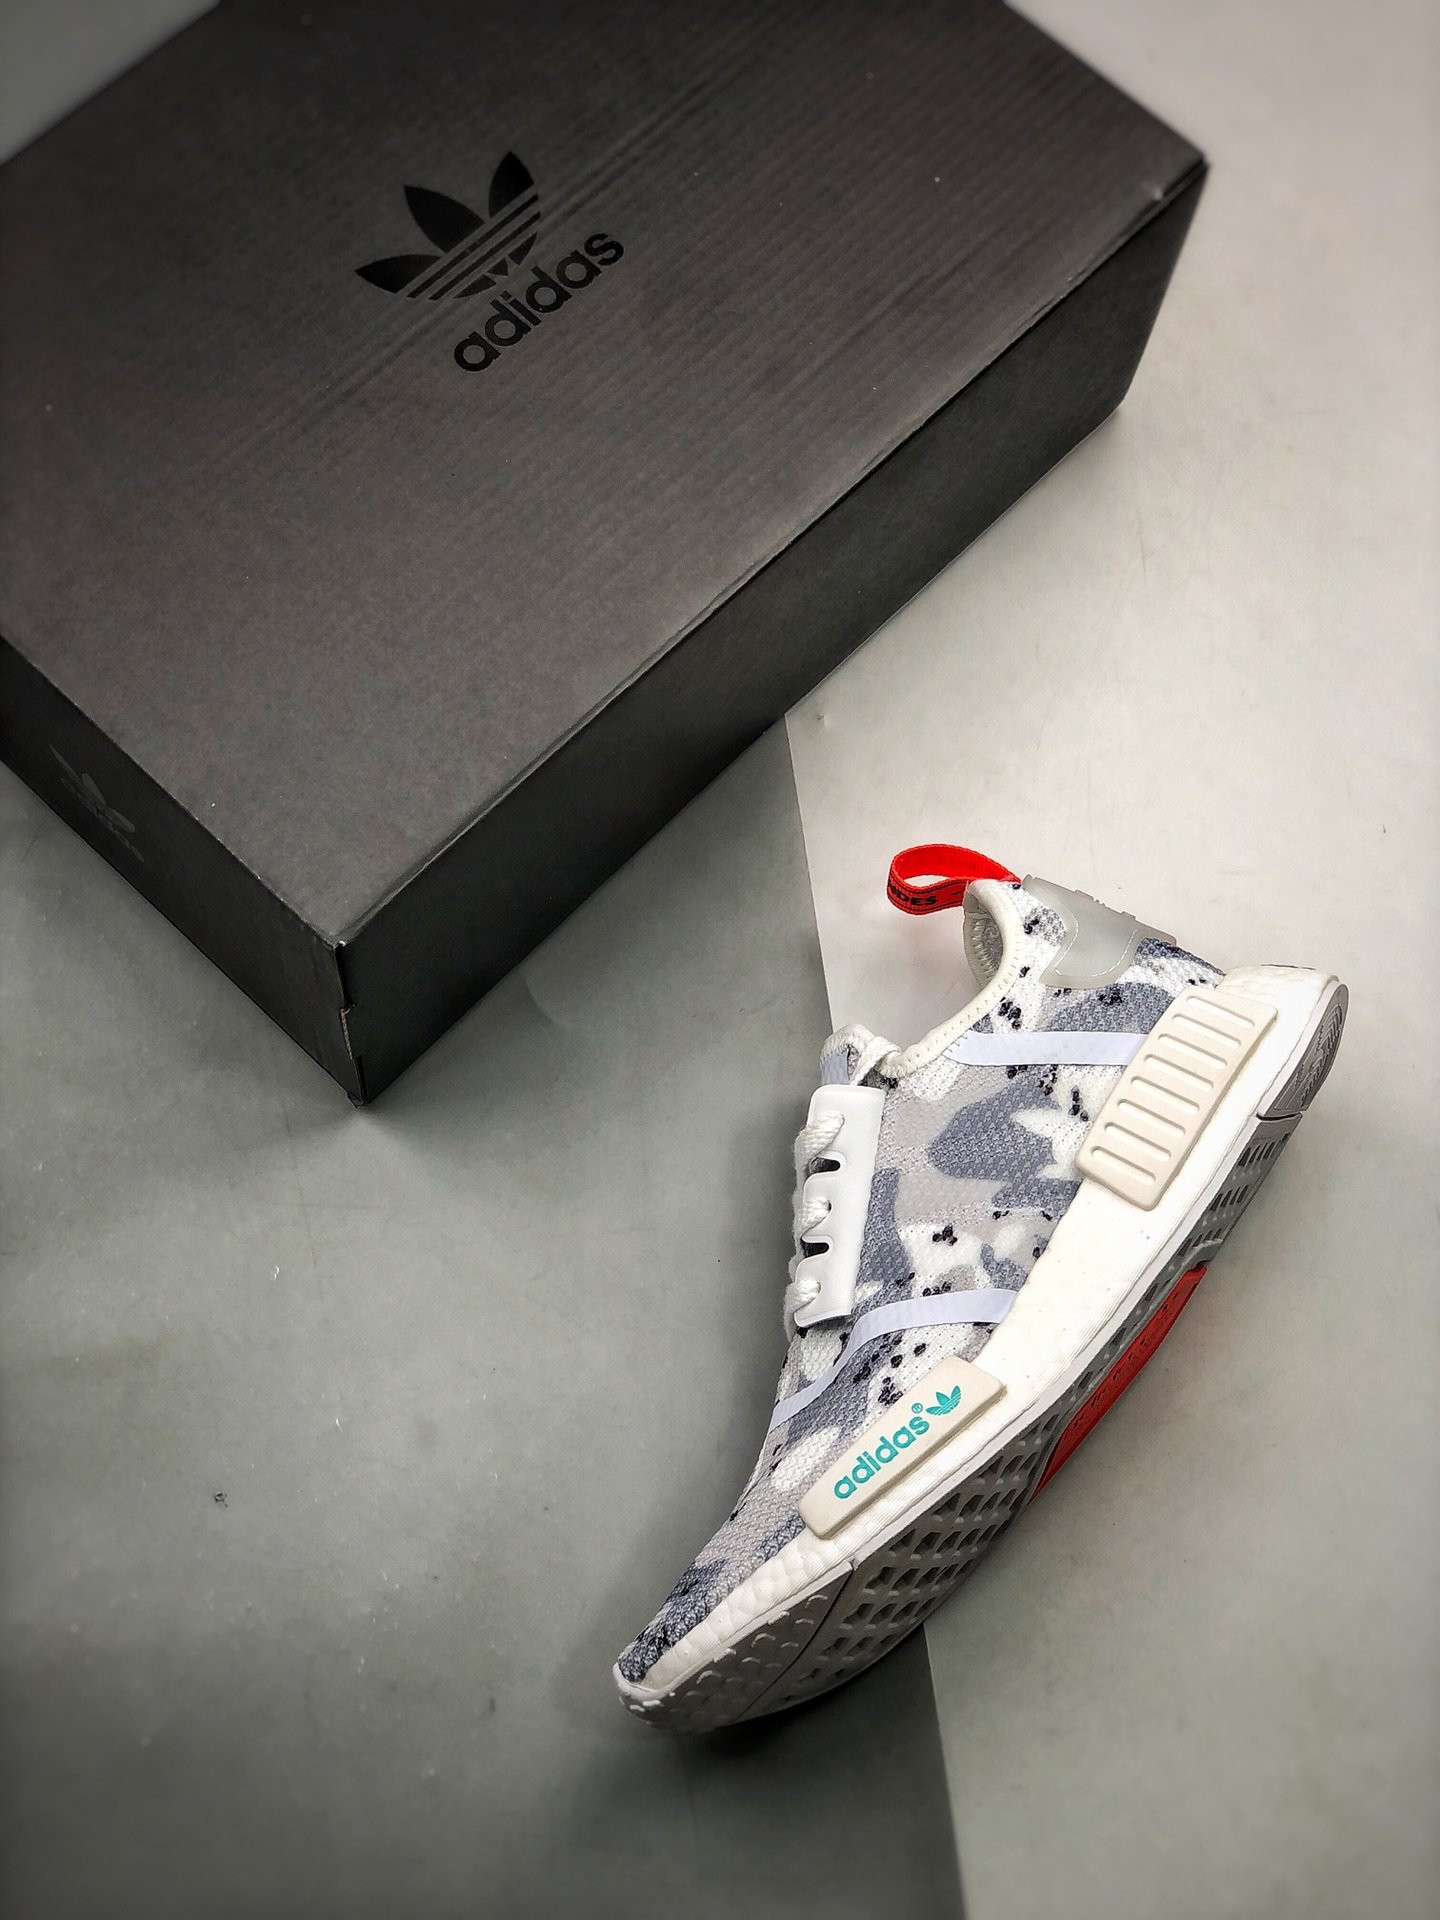 Adidas NMD R1 Cloud White G27933 For Sale